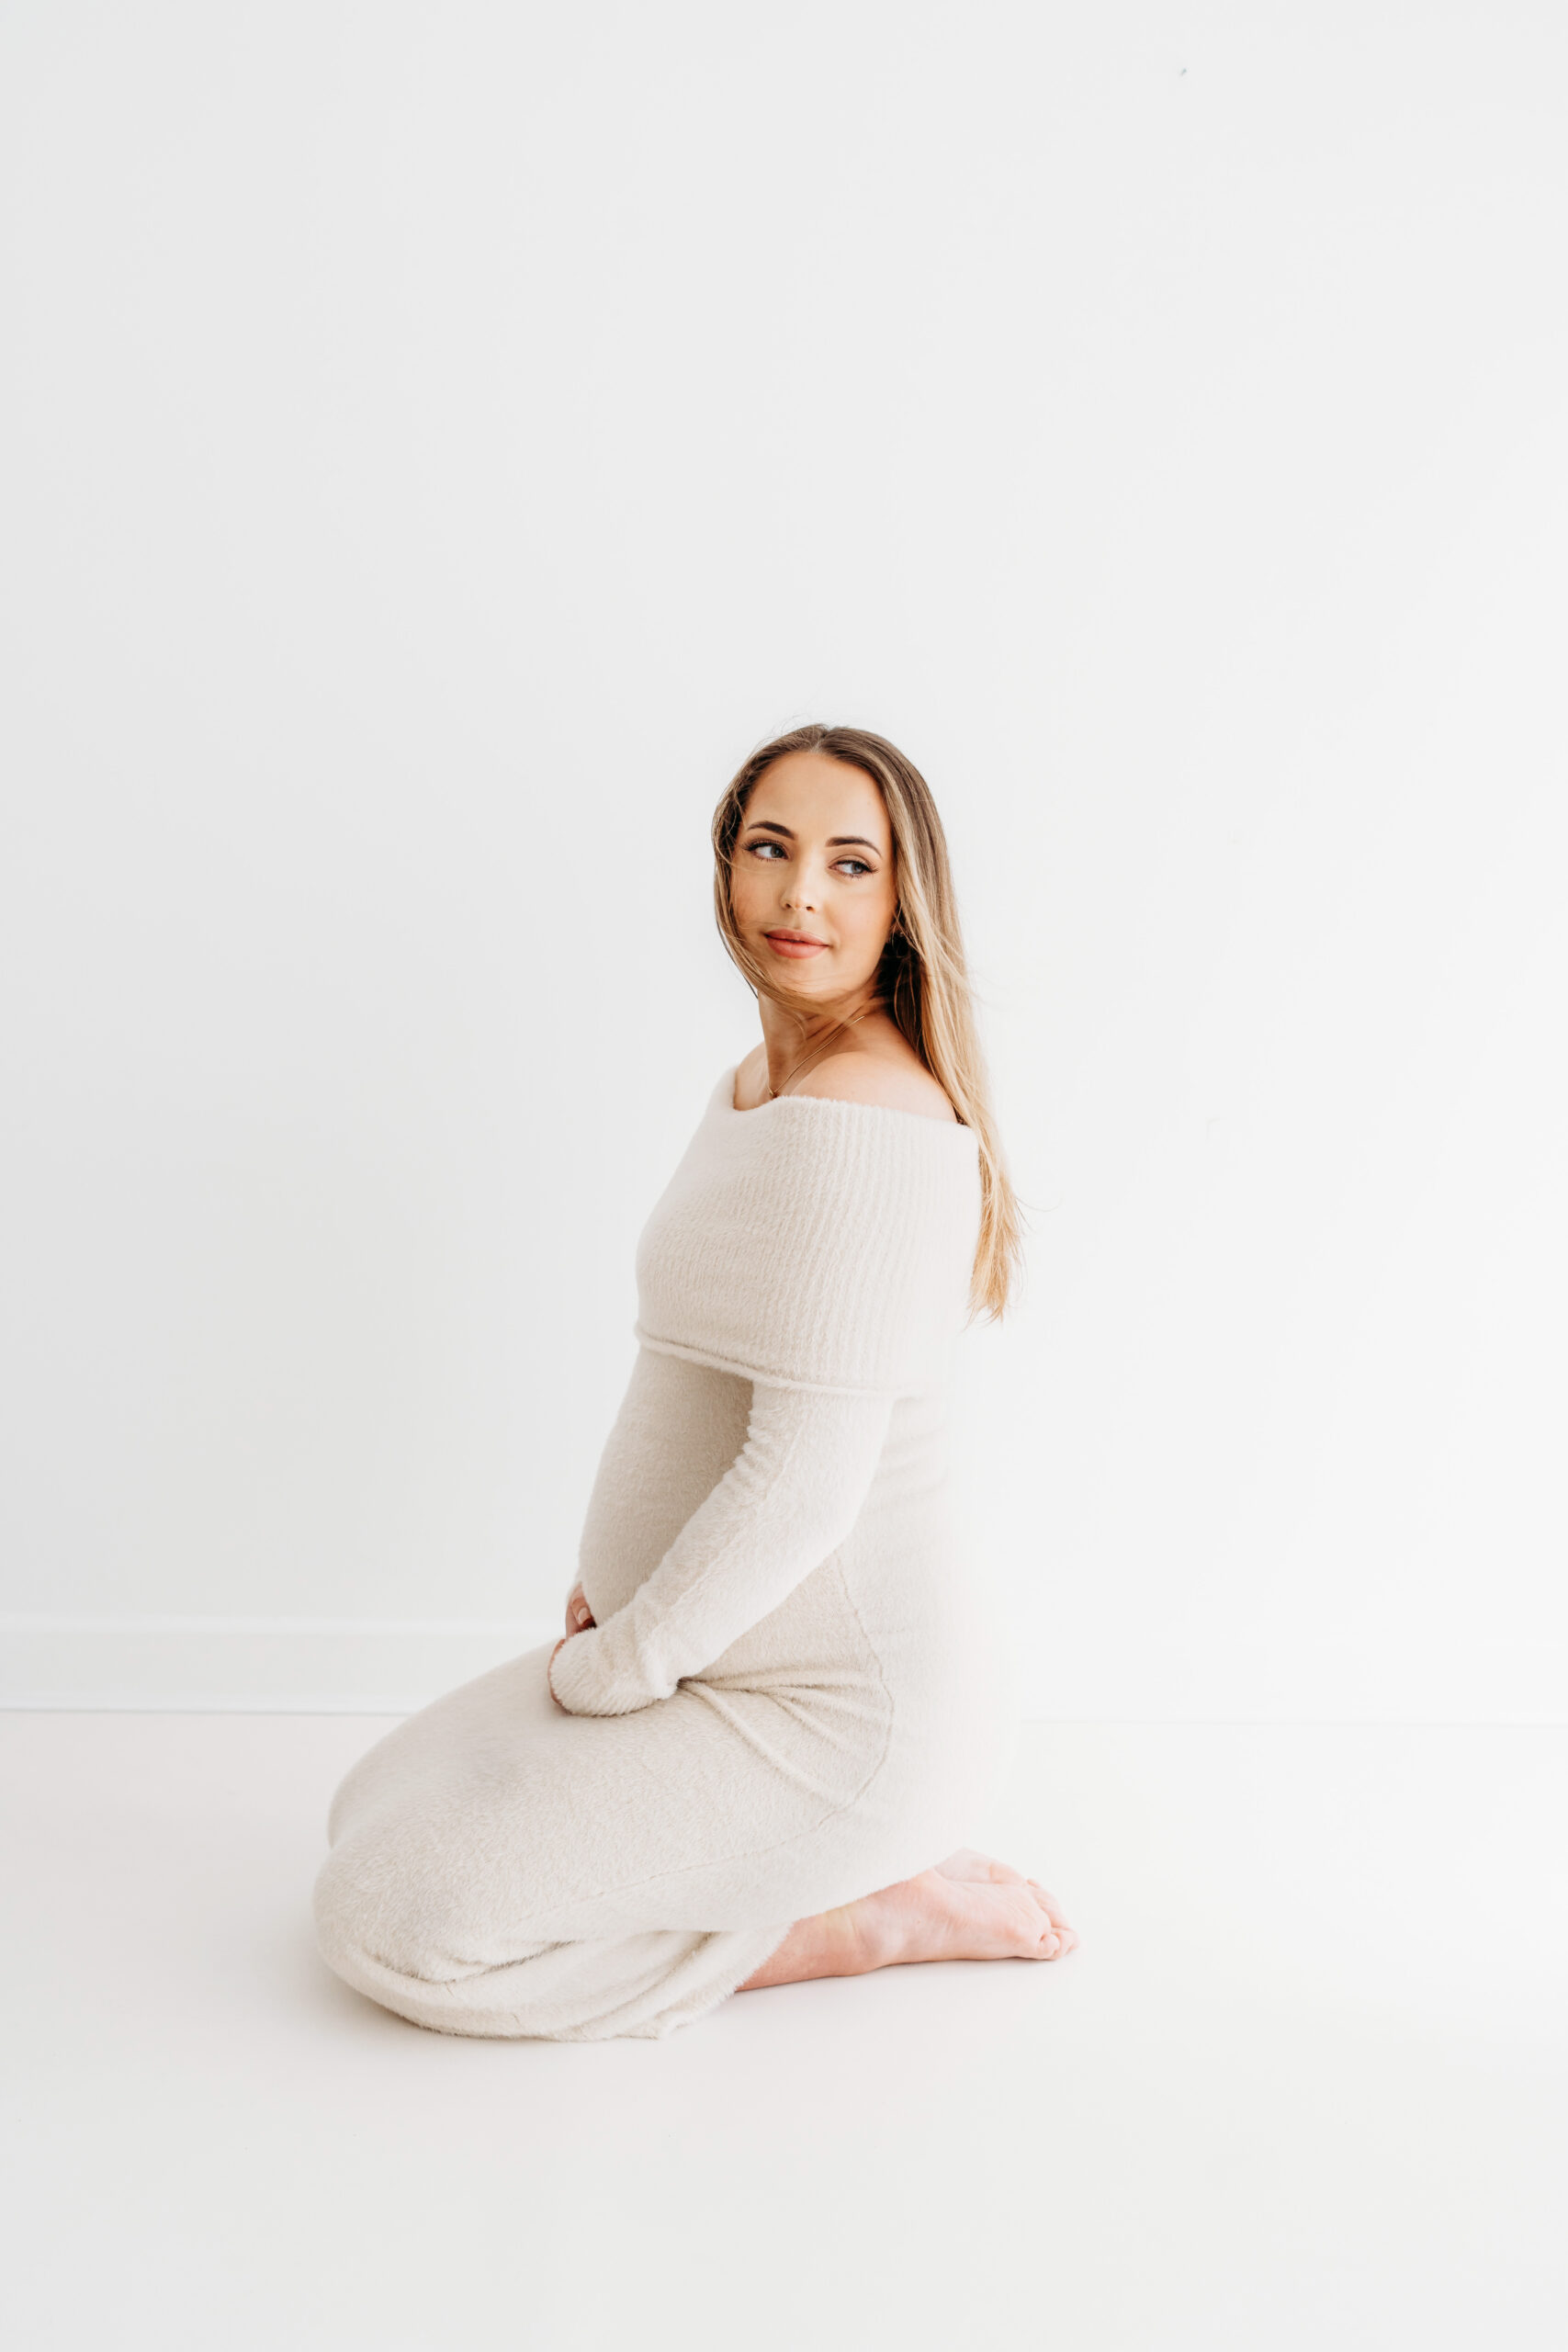 Pregnant mother on her maternity photoshoot in Cheshire